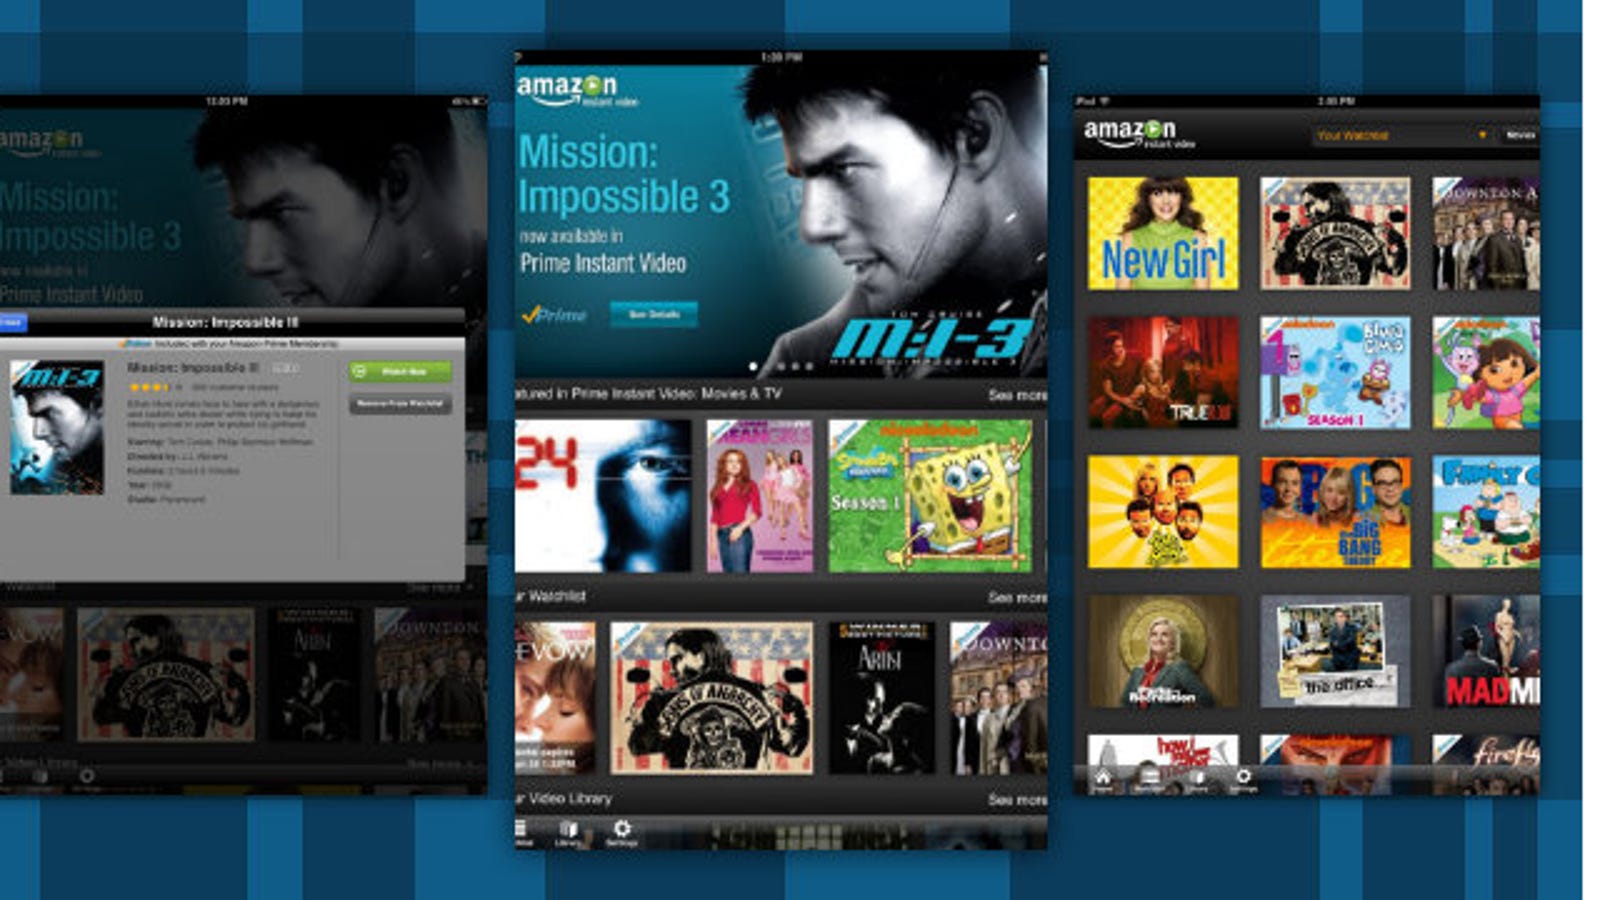 Amazon Instant Video for iPad Brings Free Movie Streaming